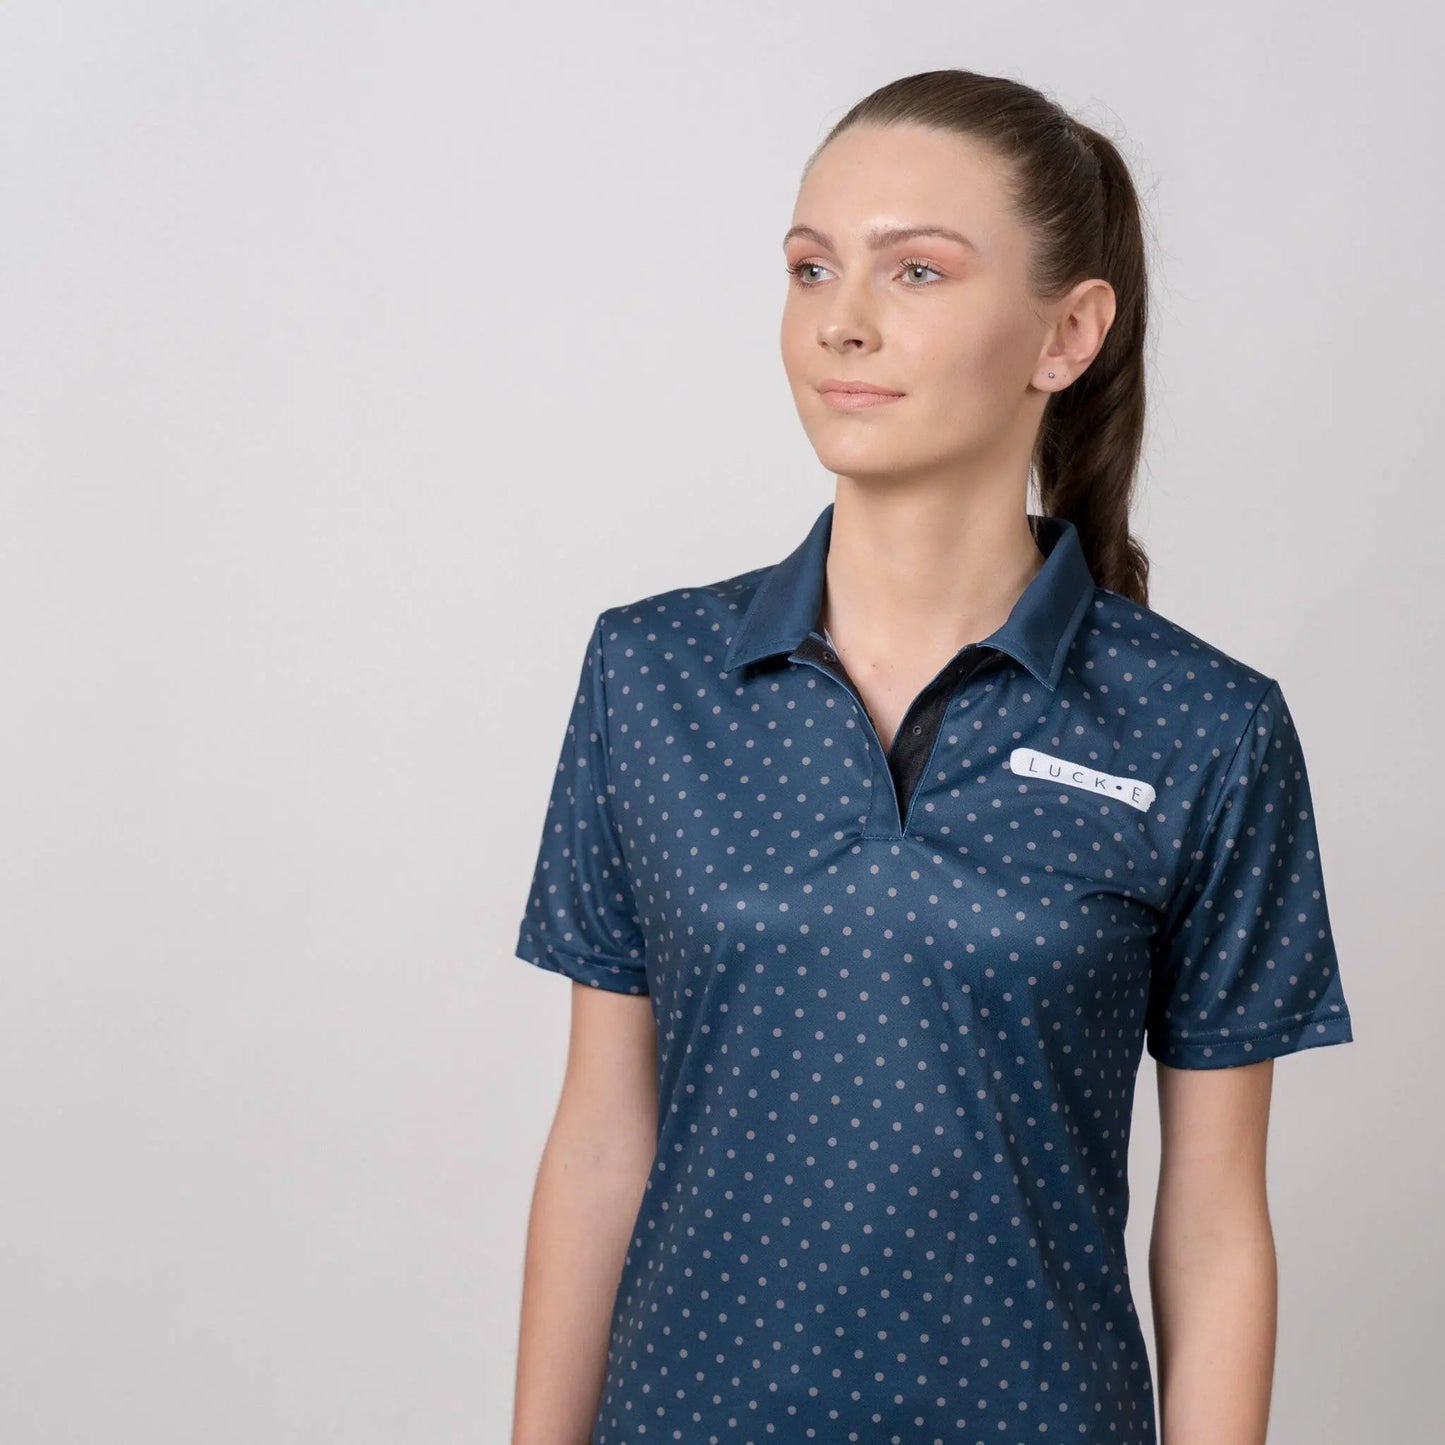 Oceana Polo | Made From 13 Plastic Bottles Removed From The Ocean LUCKE NZ